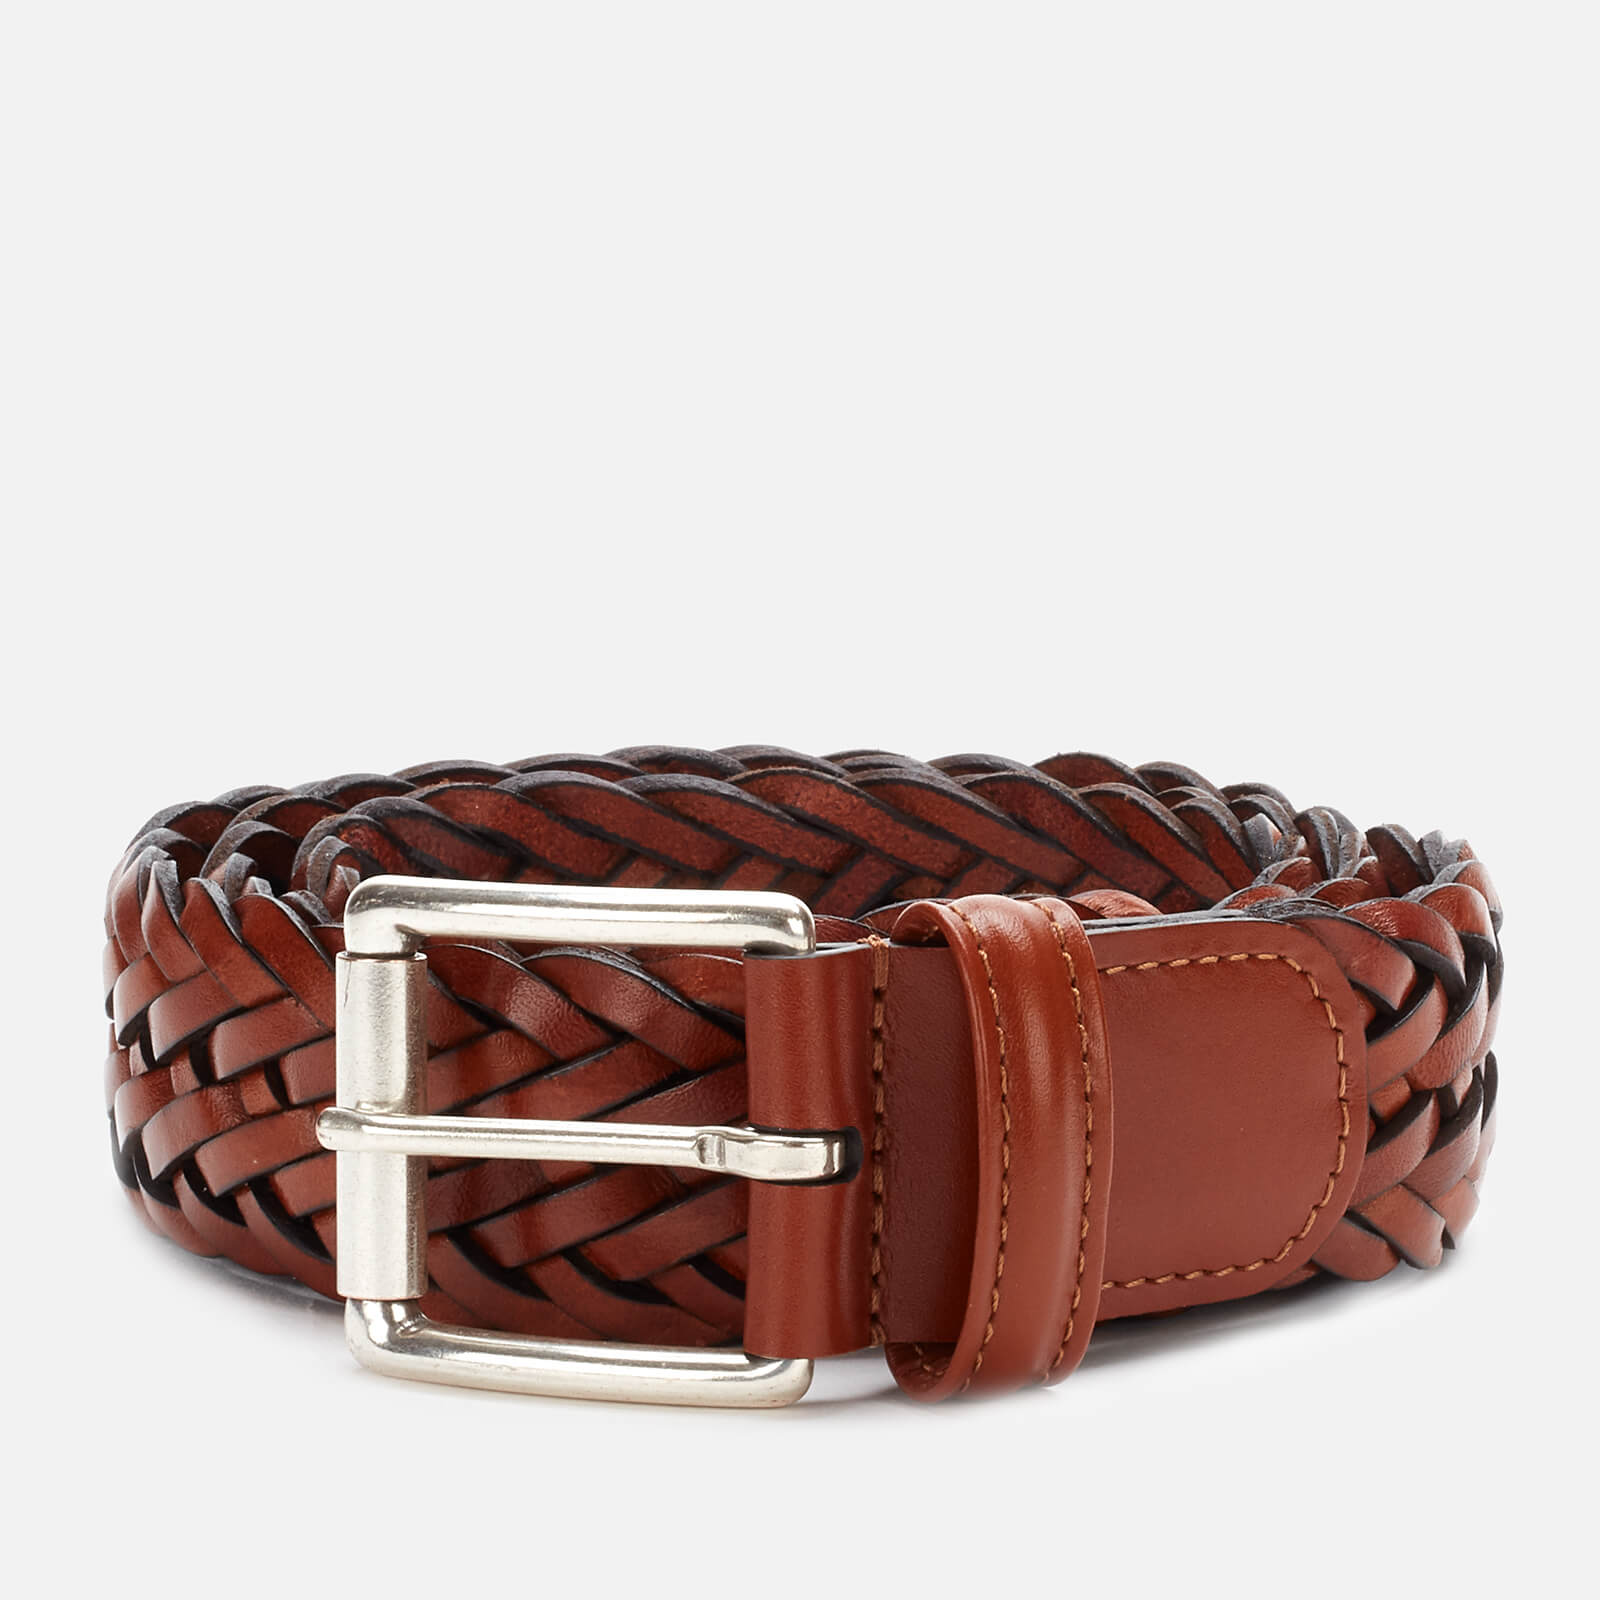 Anderson's Men's Woven Leather Belt - Brown - W36/XL